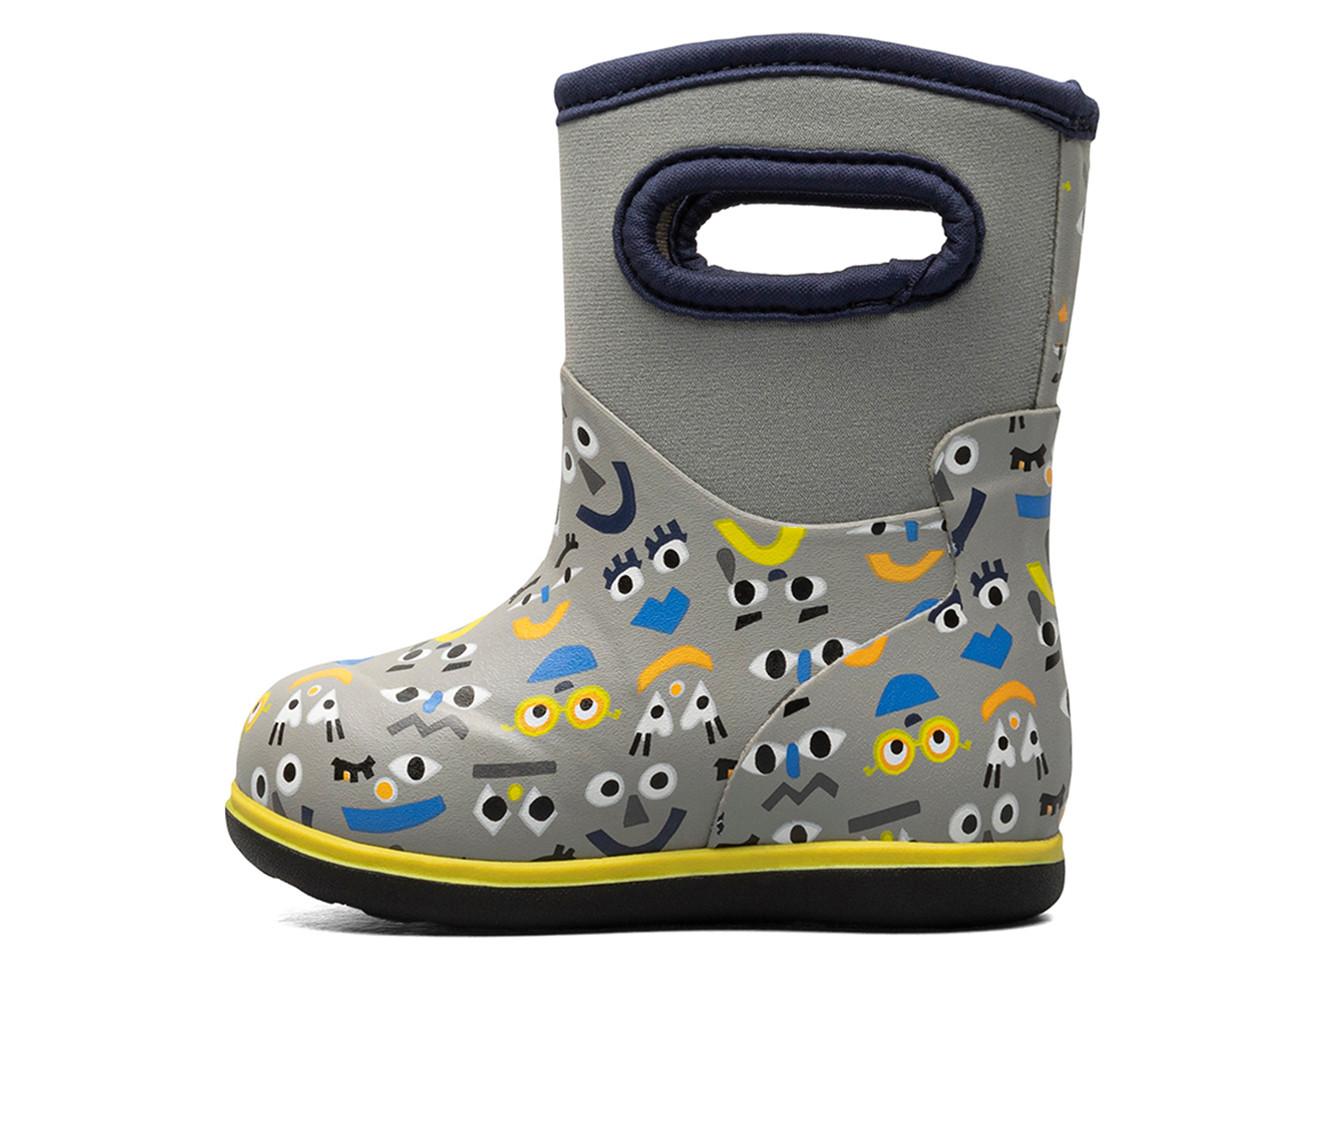 Boys' Bogs Footwear Toddler Classic Funny Faces Rain Boots